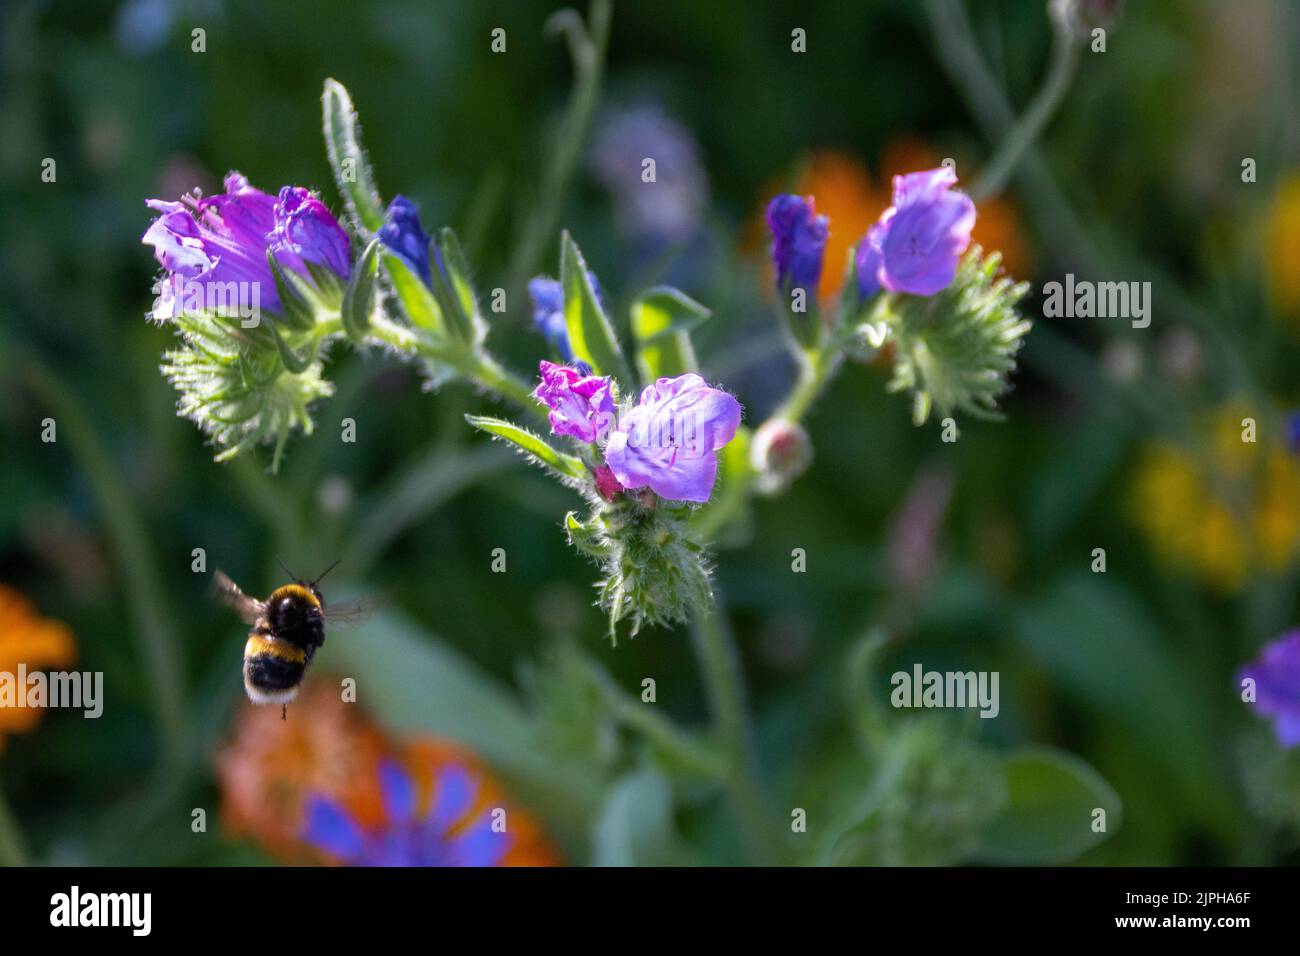 bumble bee flying towards blue shaped flowers of viper's bugloss Stock Photo